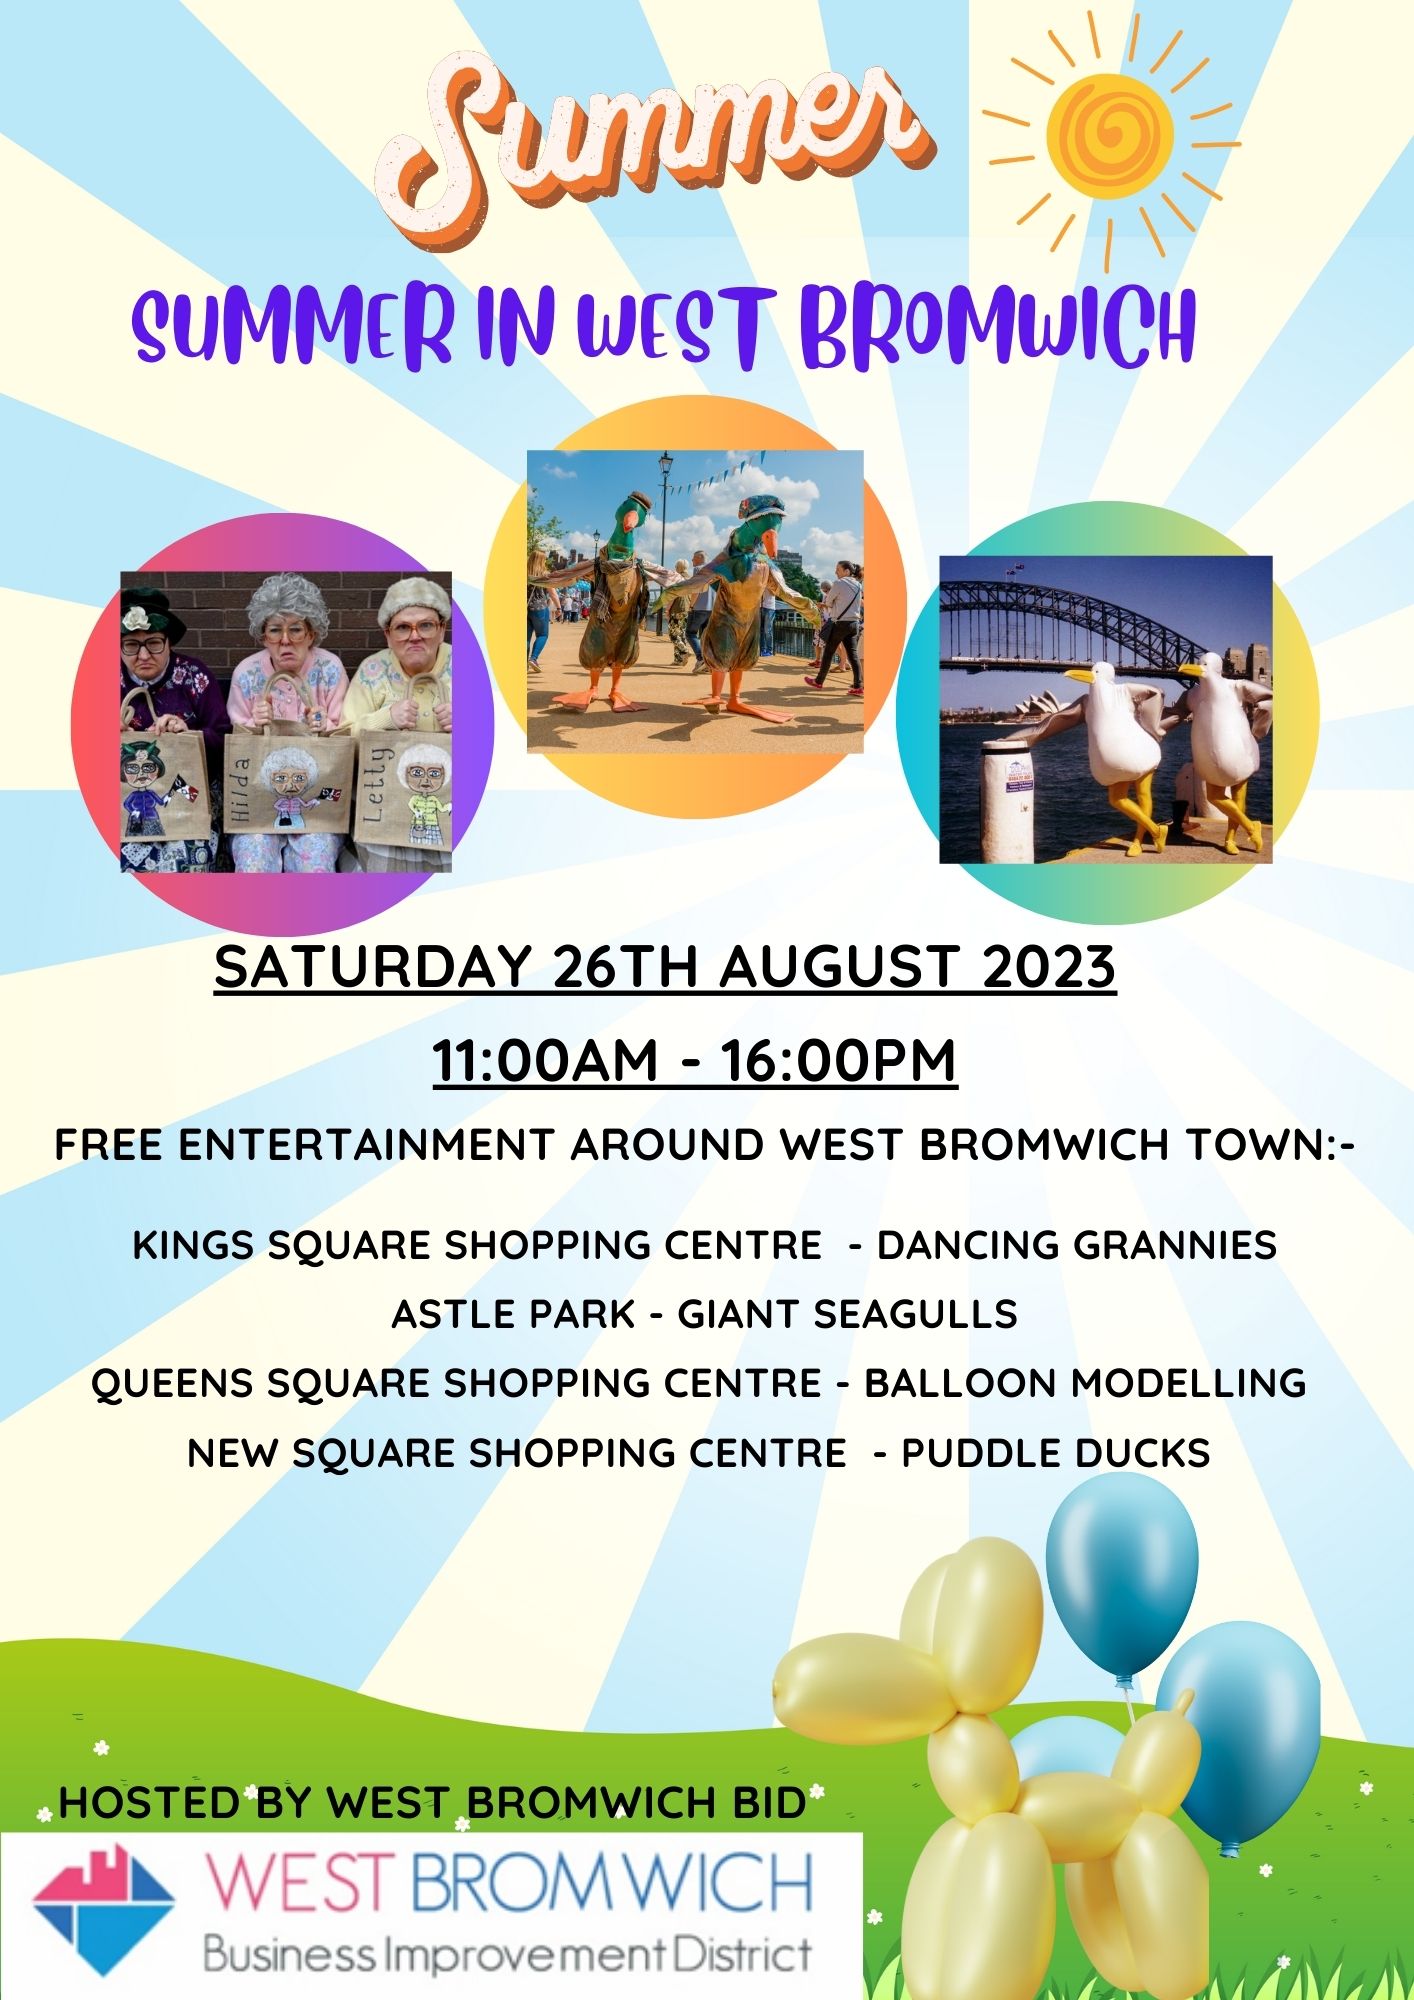 West Bromwich BID are hosting a Summer Event